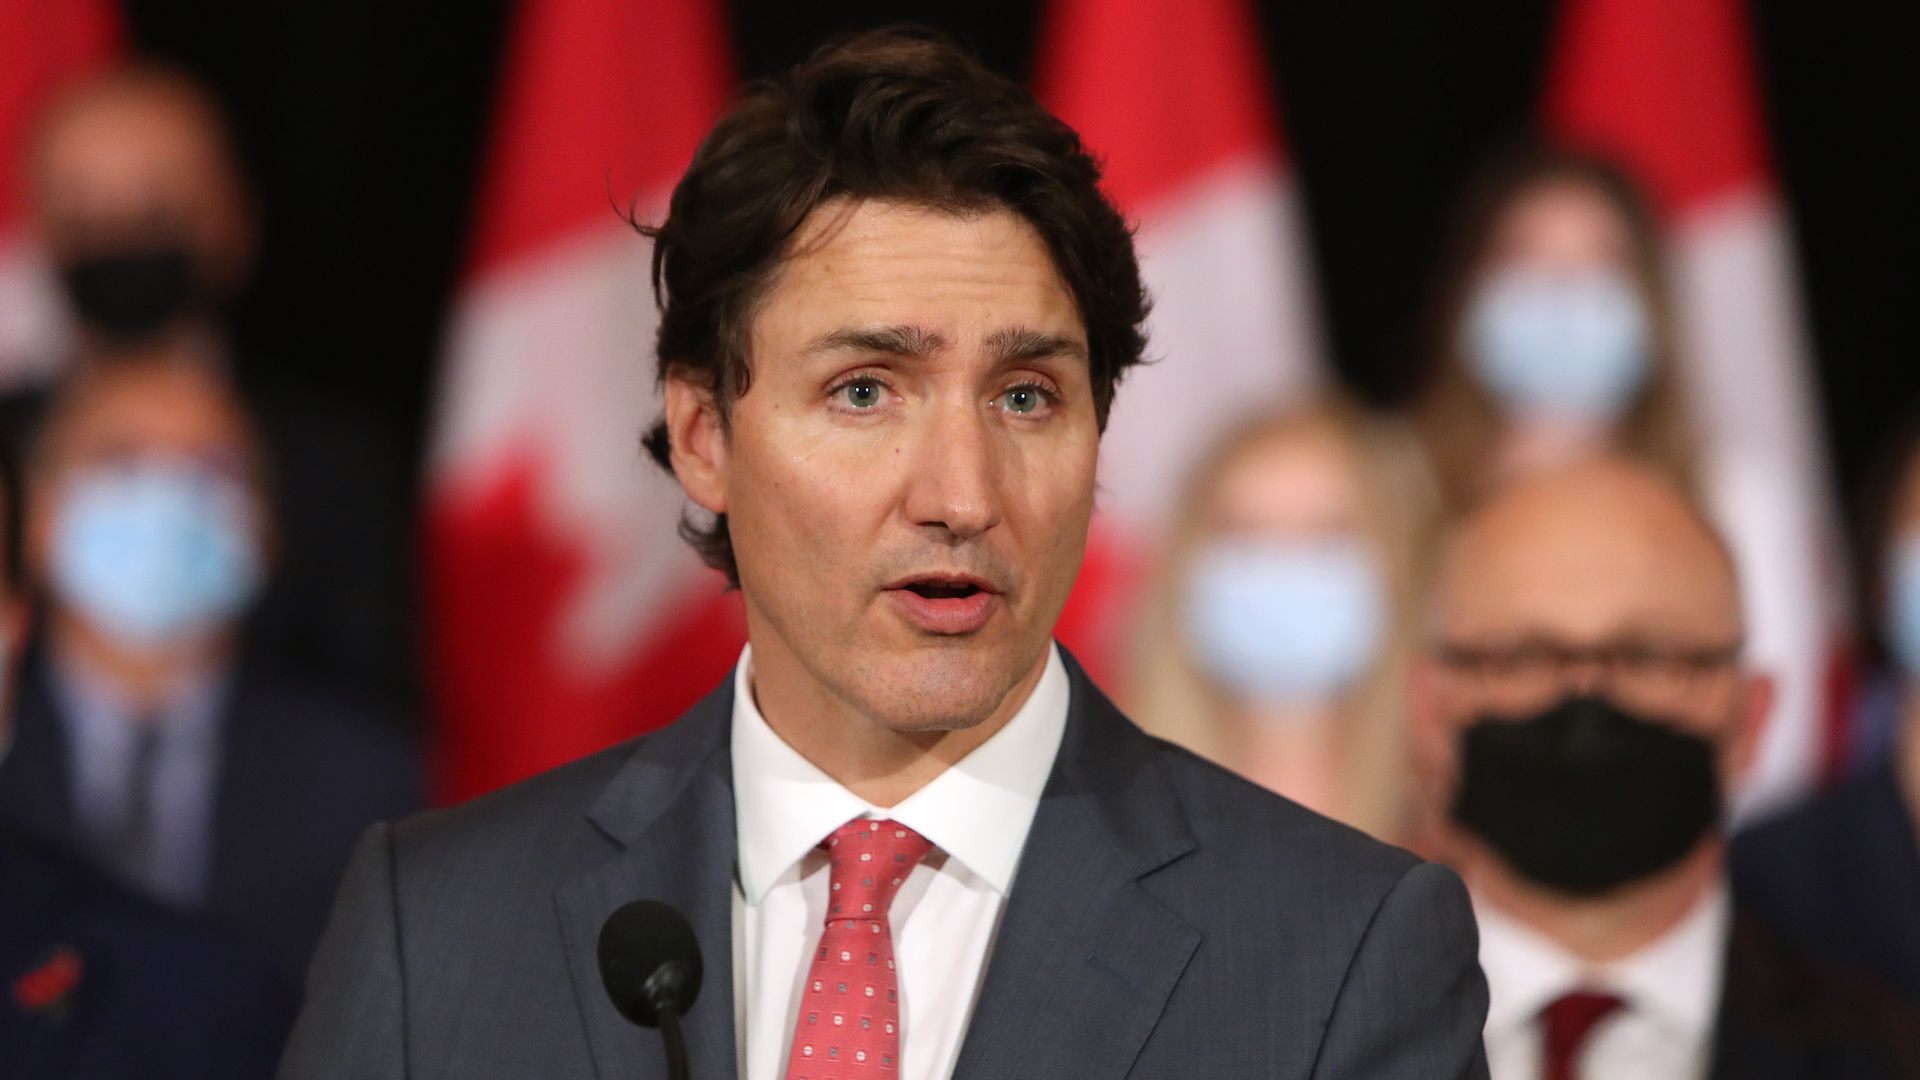 Canadian Prime Minister Justin Trudeau speaking in Ottawa on May 30.